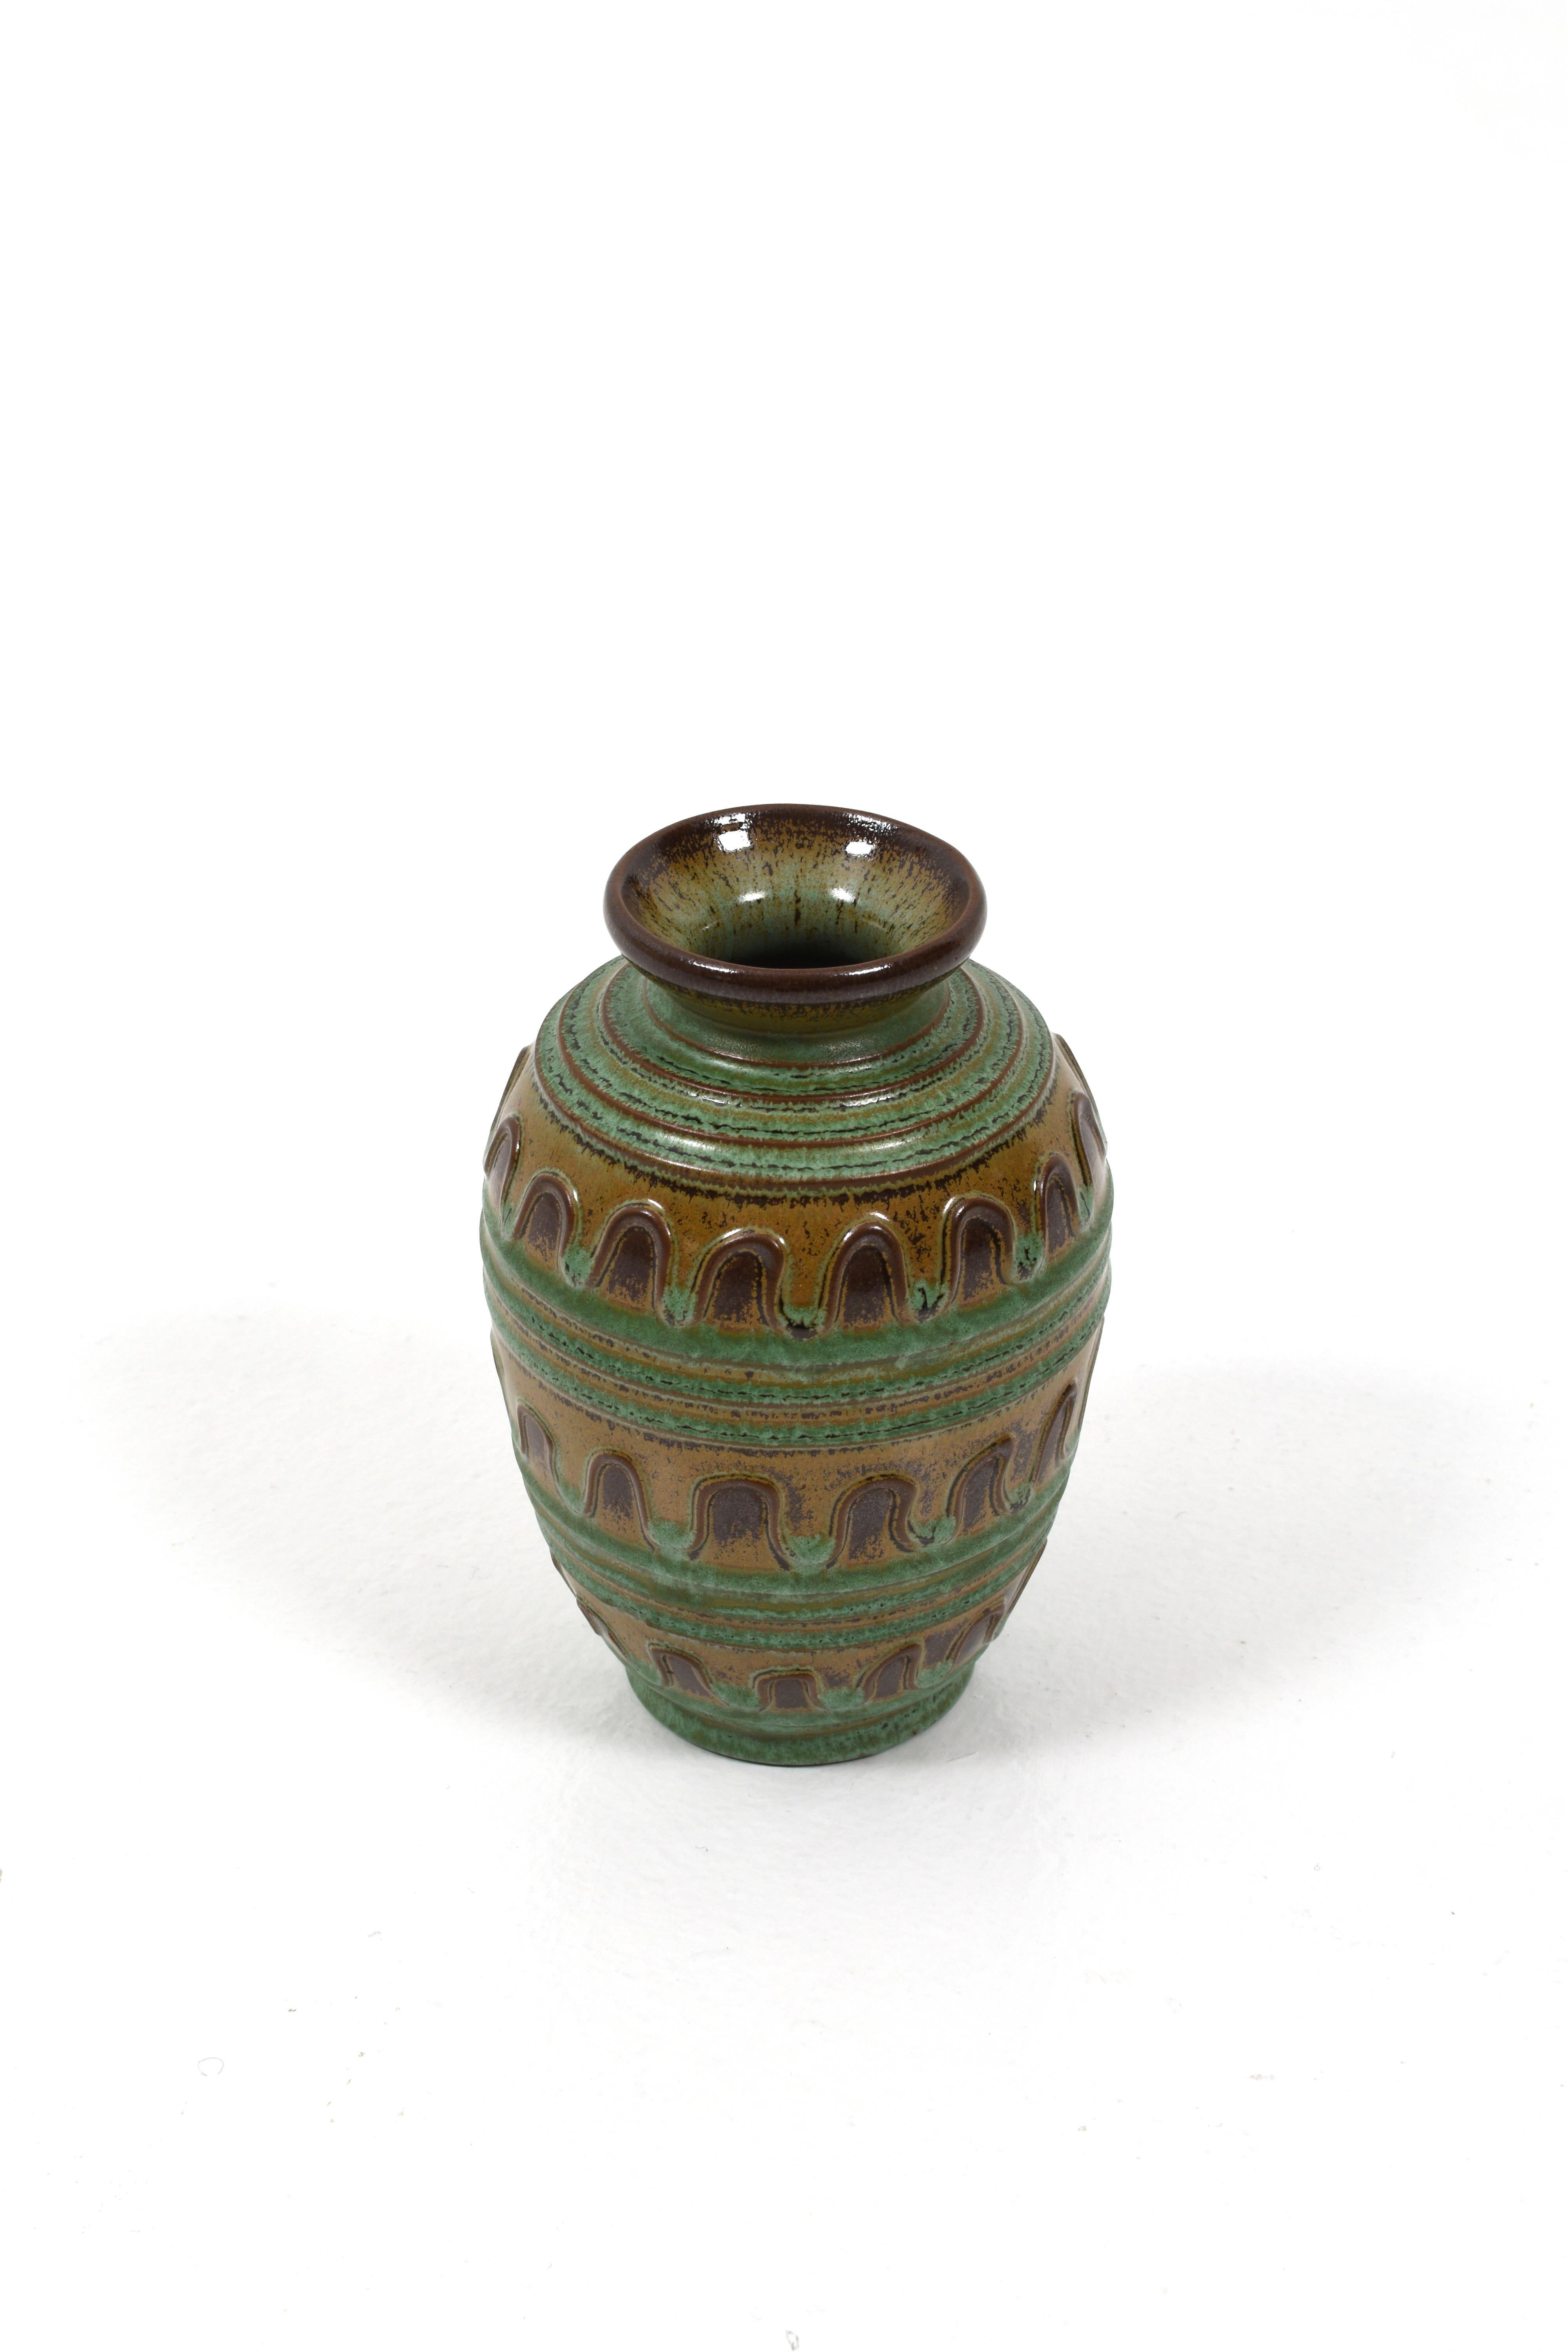 Ceramic vase in green and brown by Erik Mornils for Nittsjö, c. 1930s.
The vase has a signature at the bottom and is in very fine condition.

If you want a pair, we have one more in stock. Contact us and we can offer a good price.